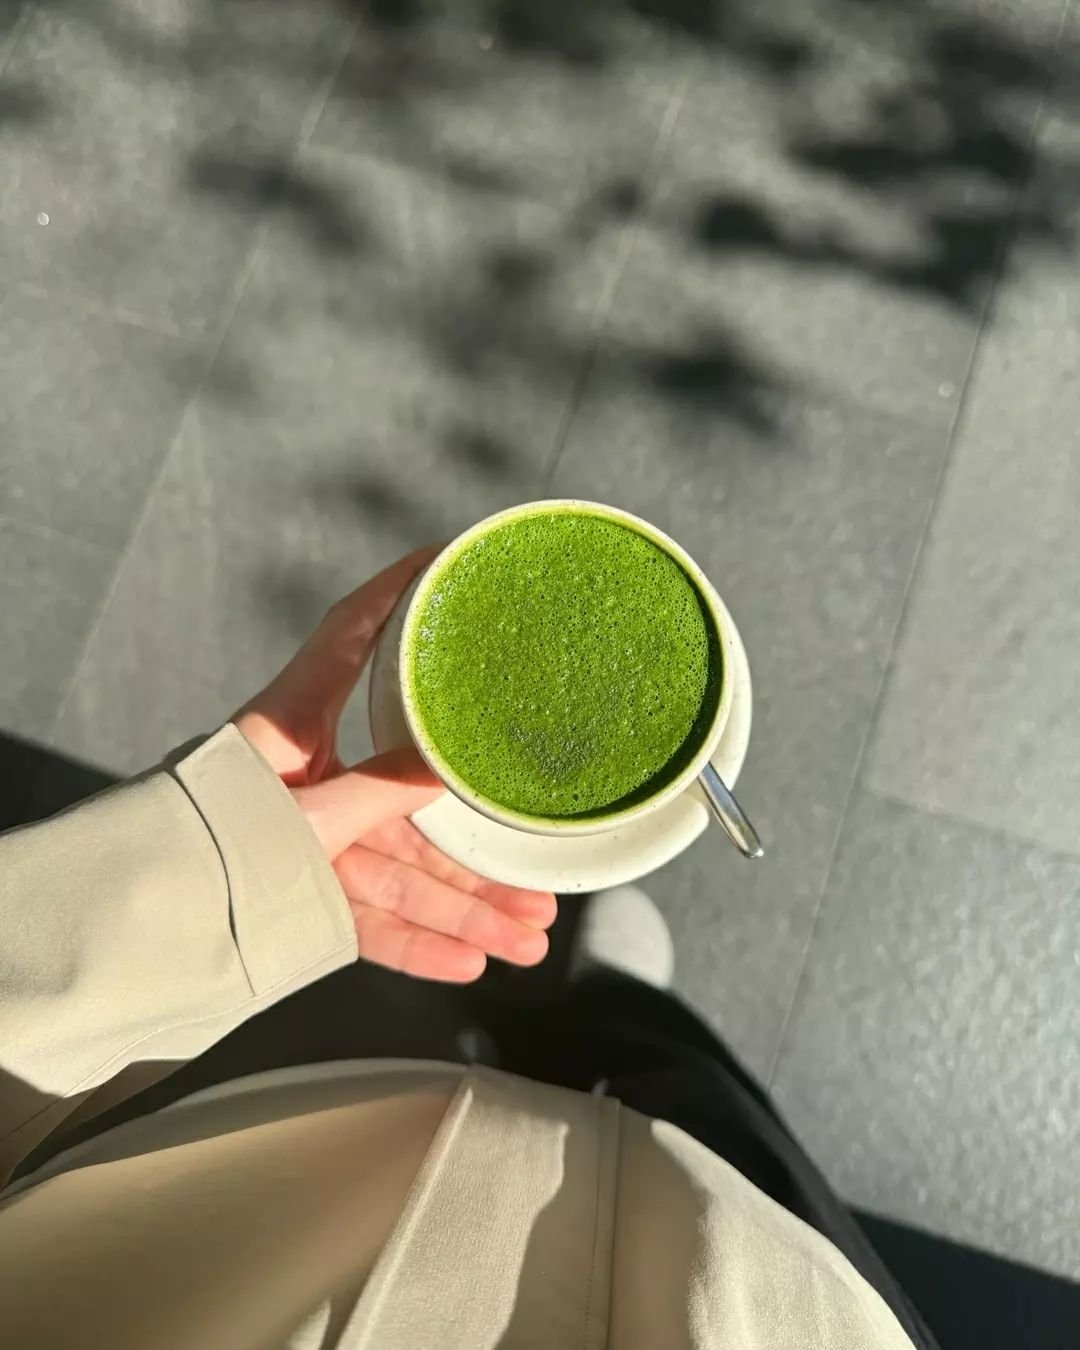 Calling all matcha lovers! 🍵 We're thrilled to announce that our matcha powder comes directly from the renowned UJI MARUKYU KOYAMAEN brand, thanks to our fabulous supplier @simplynativejapan here in Sydney. Dive into the unique richness of our exclu